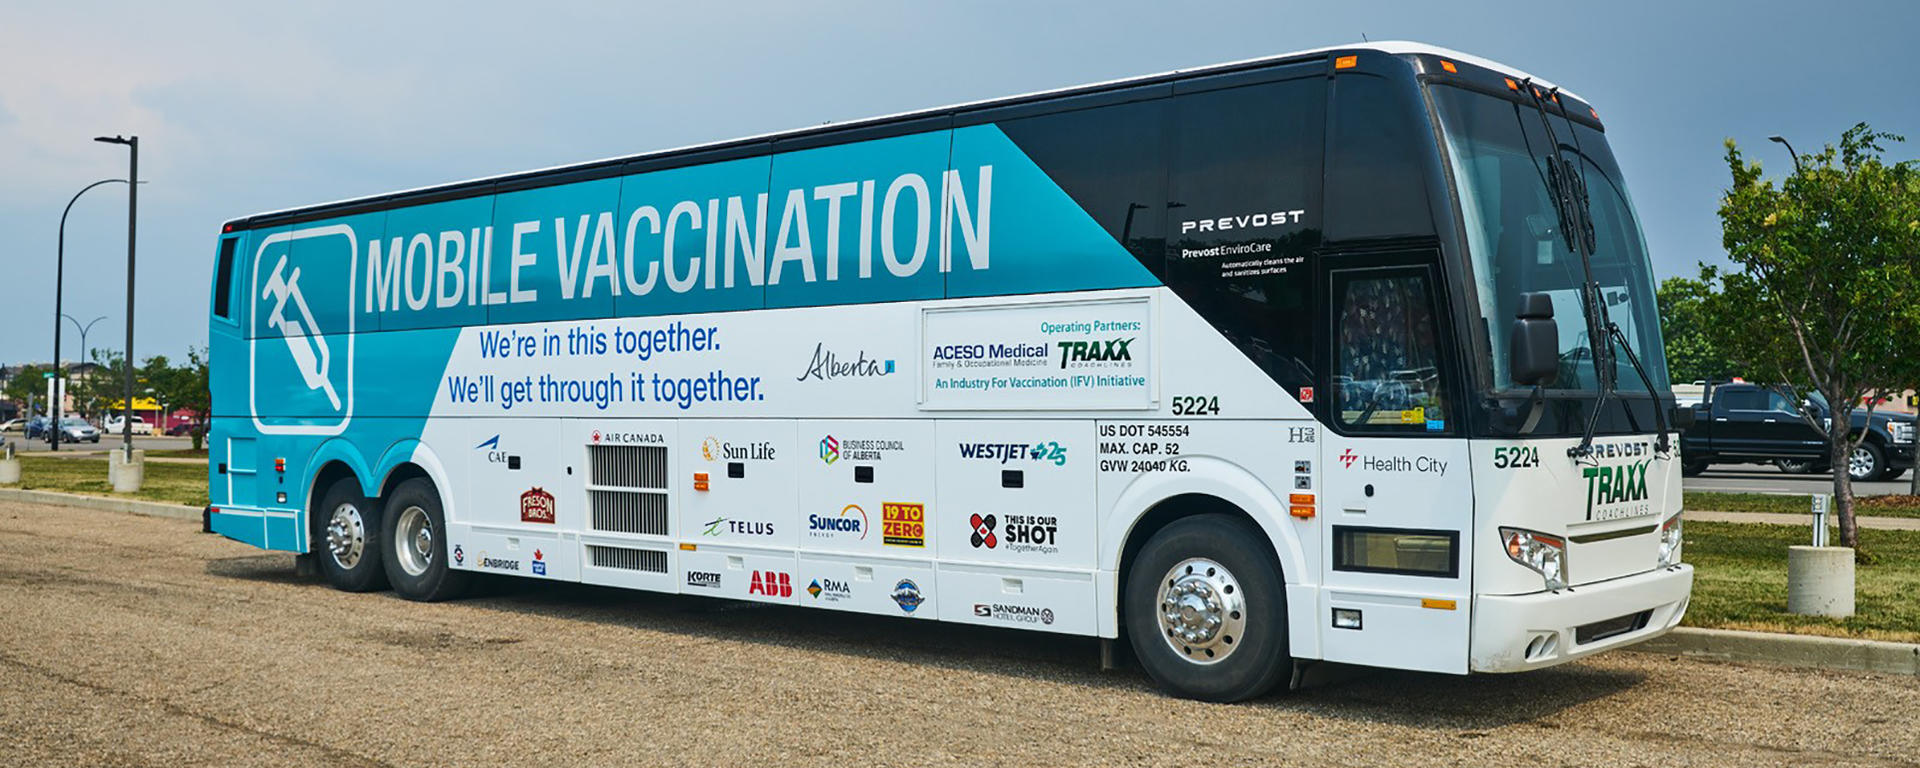 Mobile vaccination bus